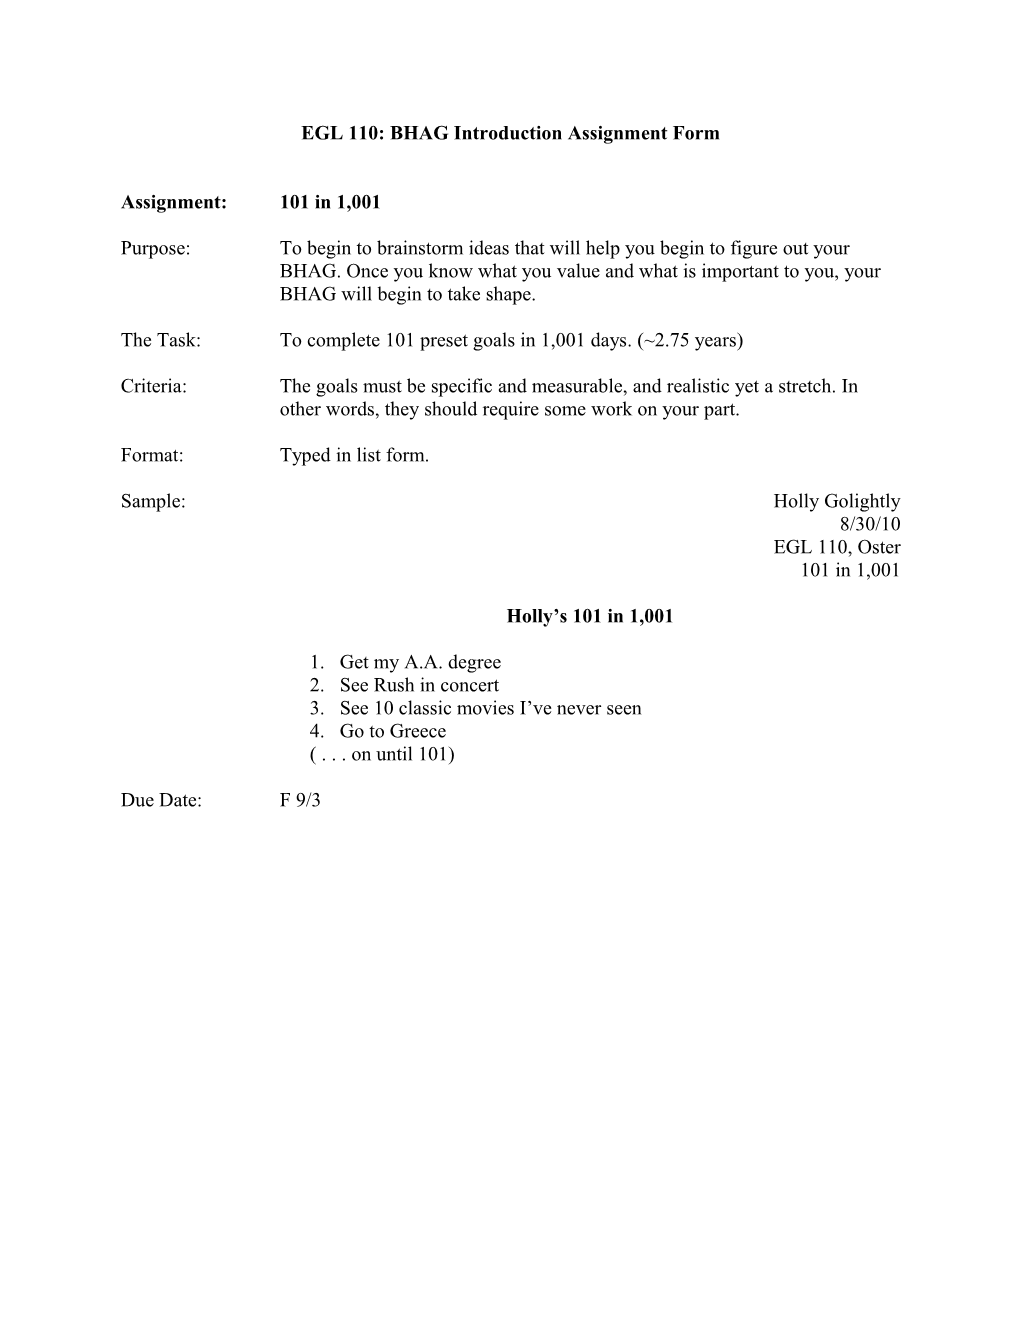 EGL 094: BHAG Introduction Assignment Form